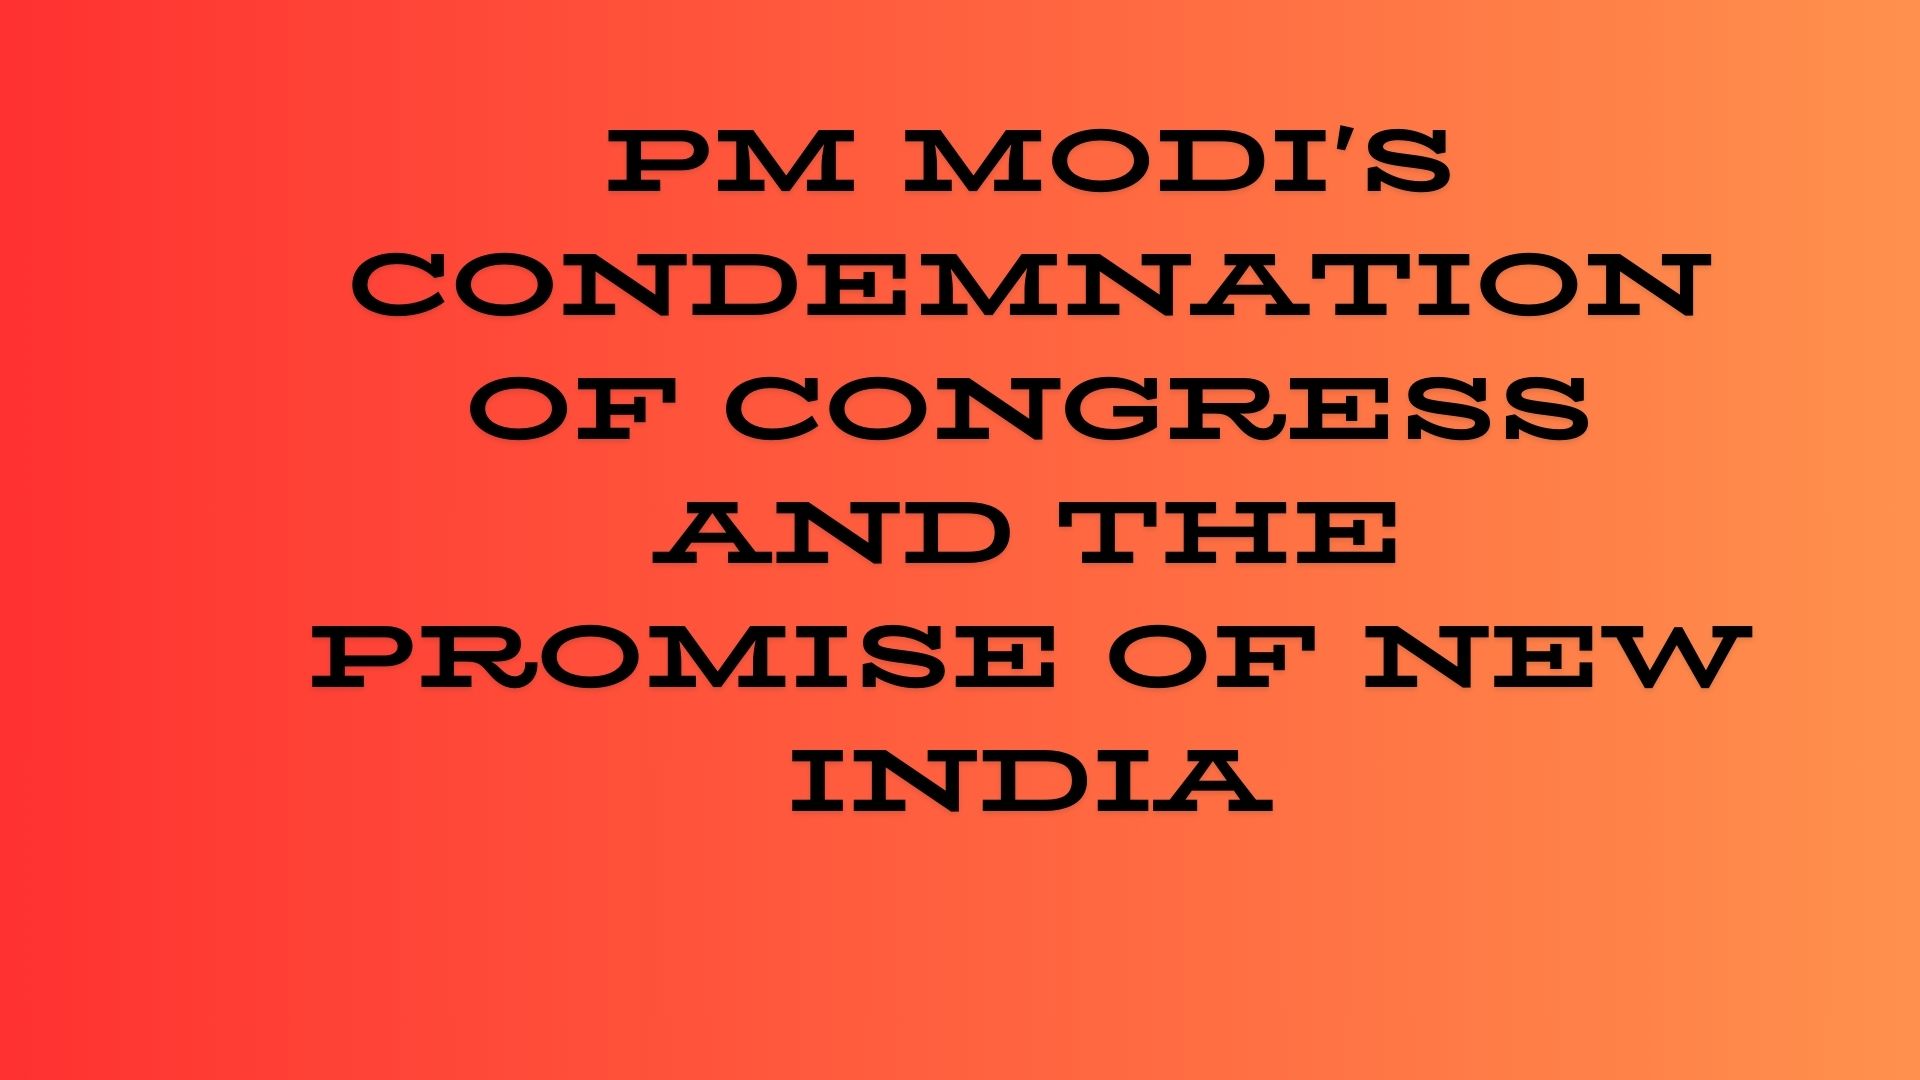 PM Modi’s Condemnation of Congress and the Promise of New India